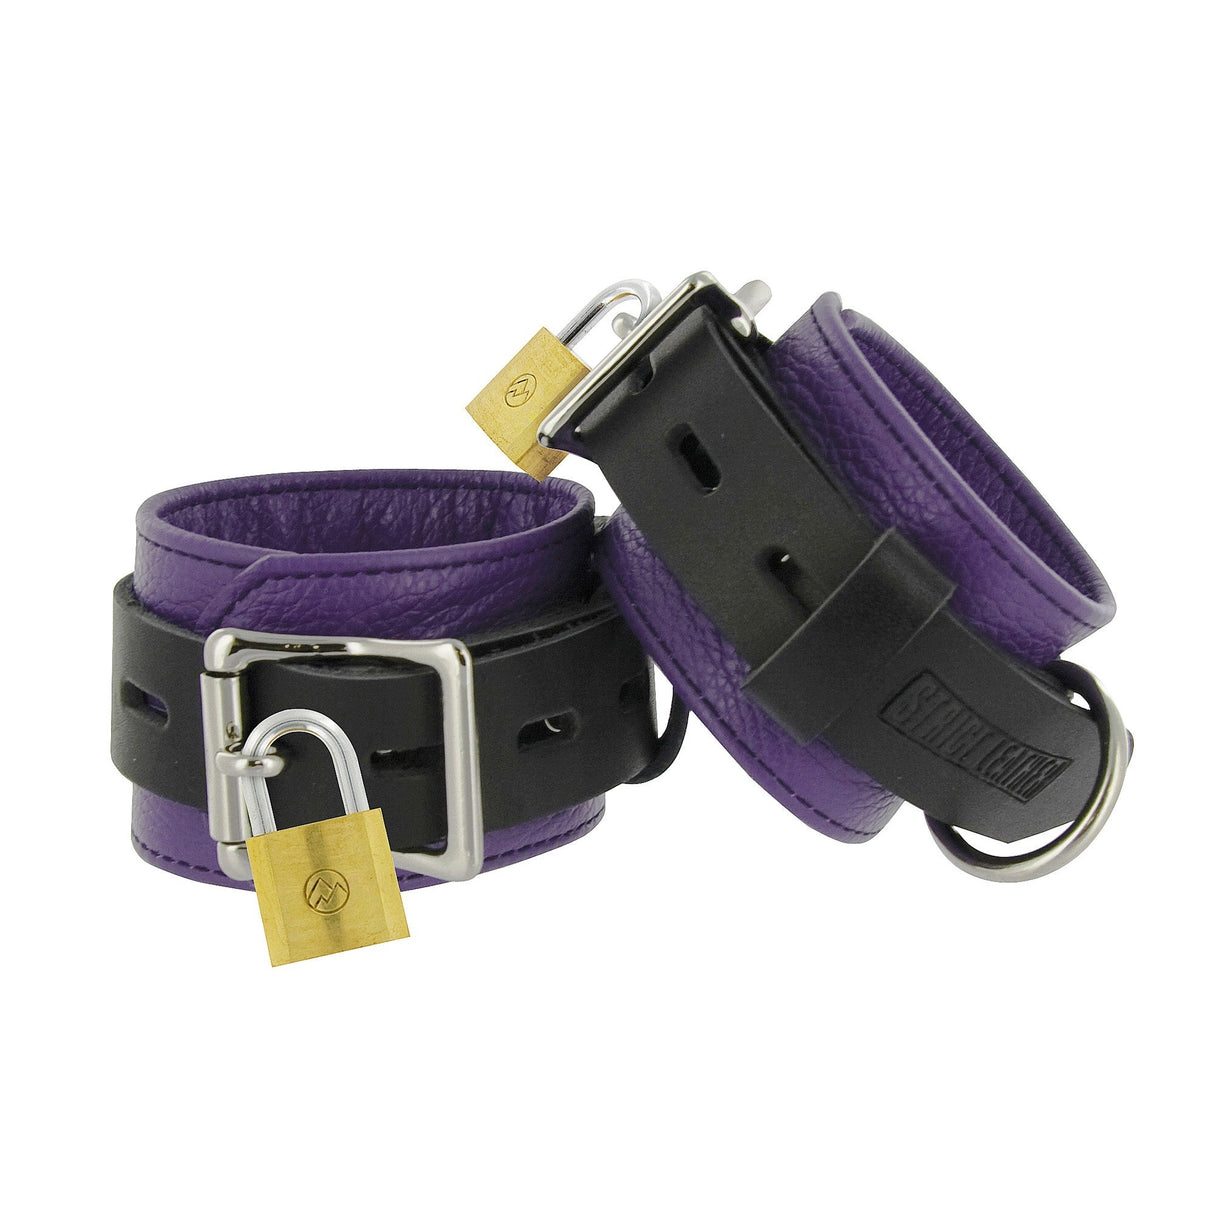 Strict Leather Deluxe Black and Purple Locking Wrist Cuffs